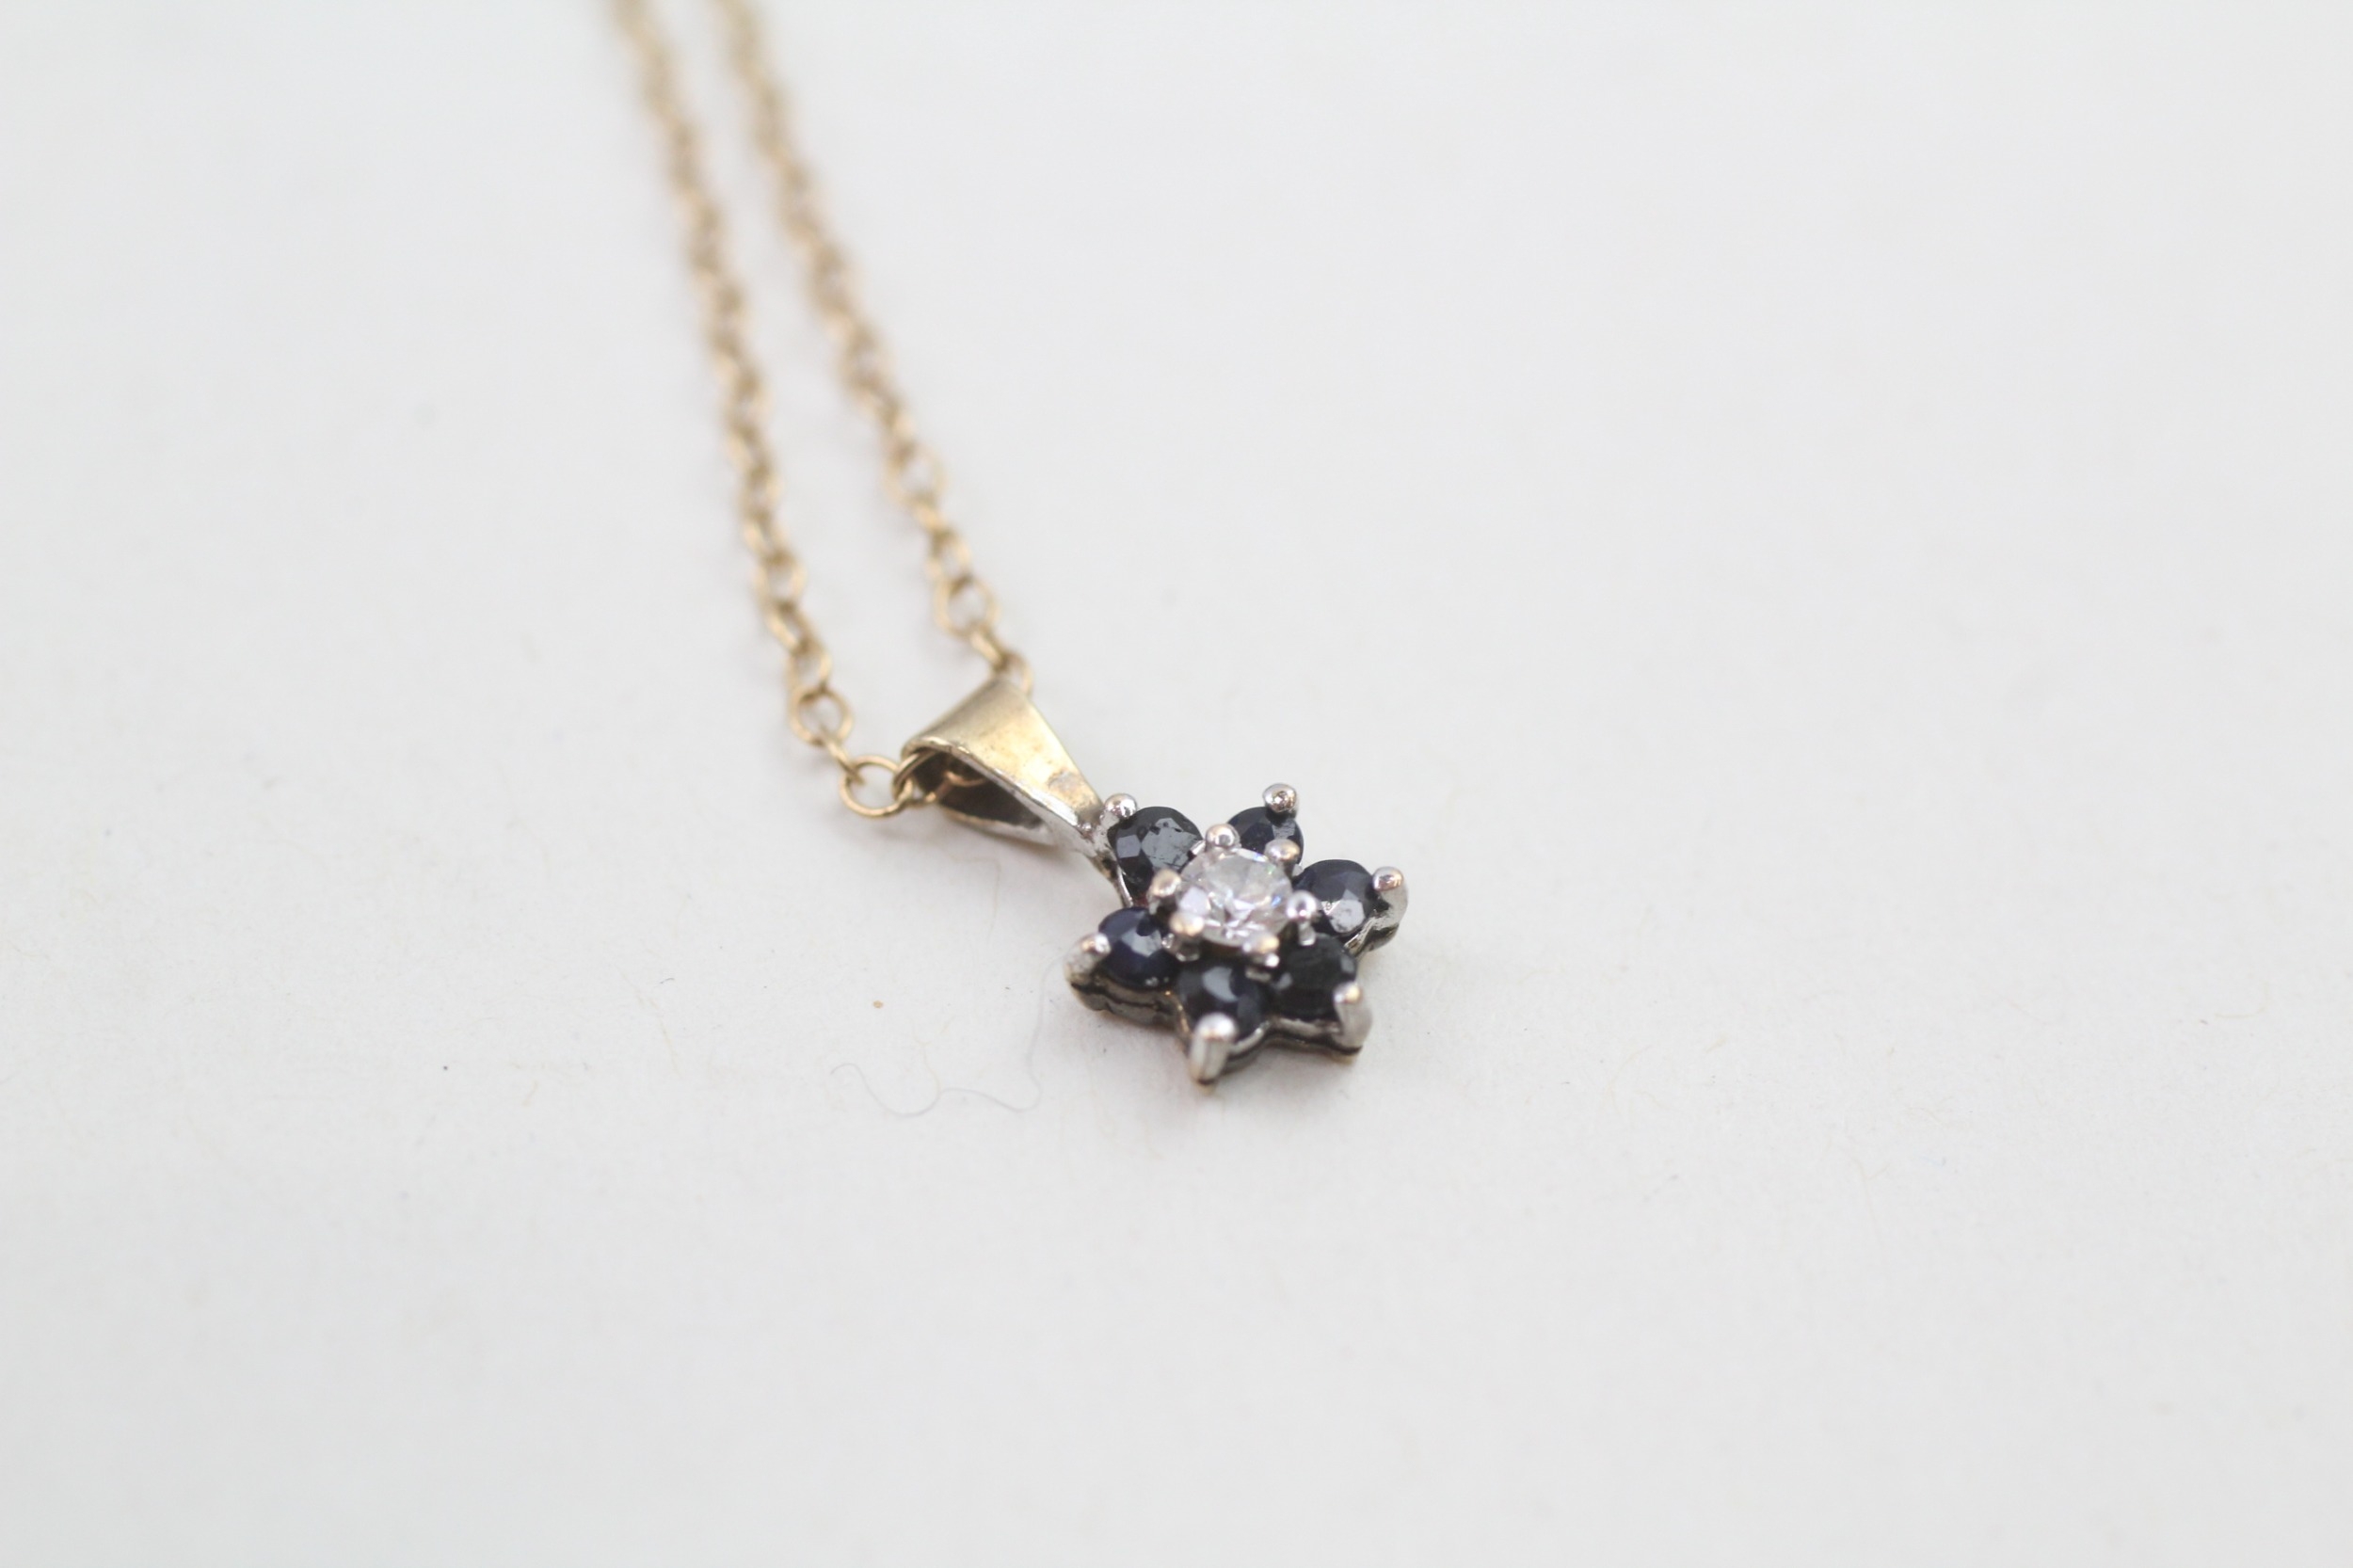 9ct gold sapphire & cubic zirconia cluster pendant necklace (1.1g) - Image 2 of 4